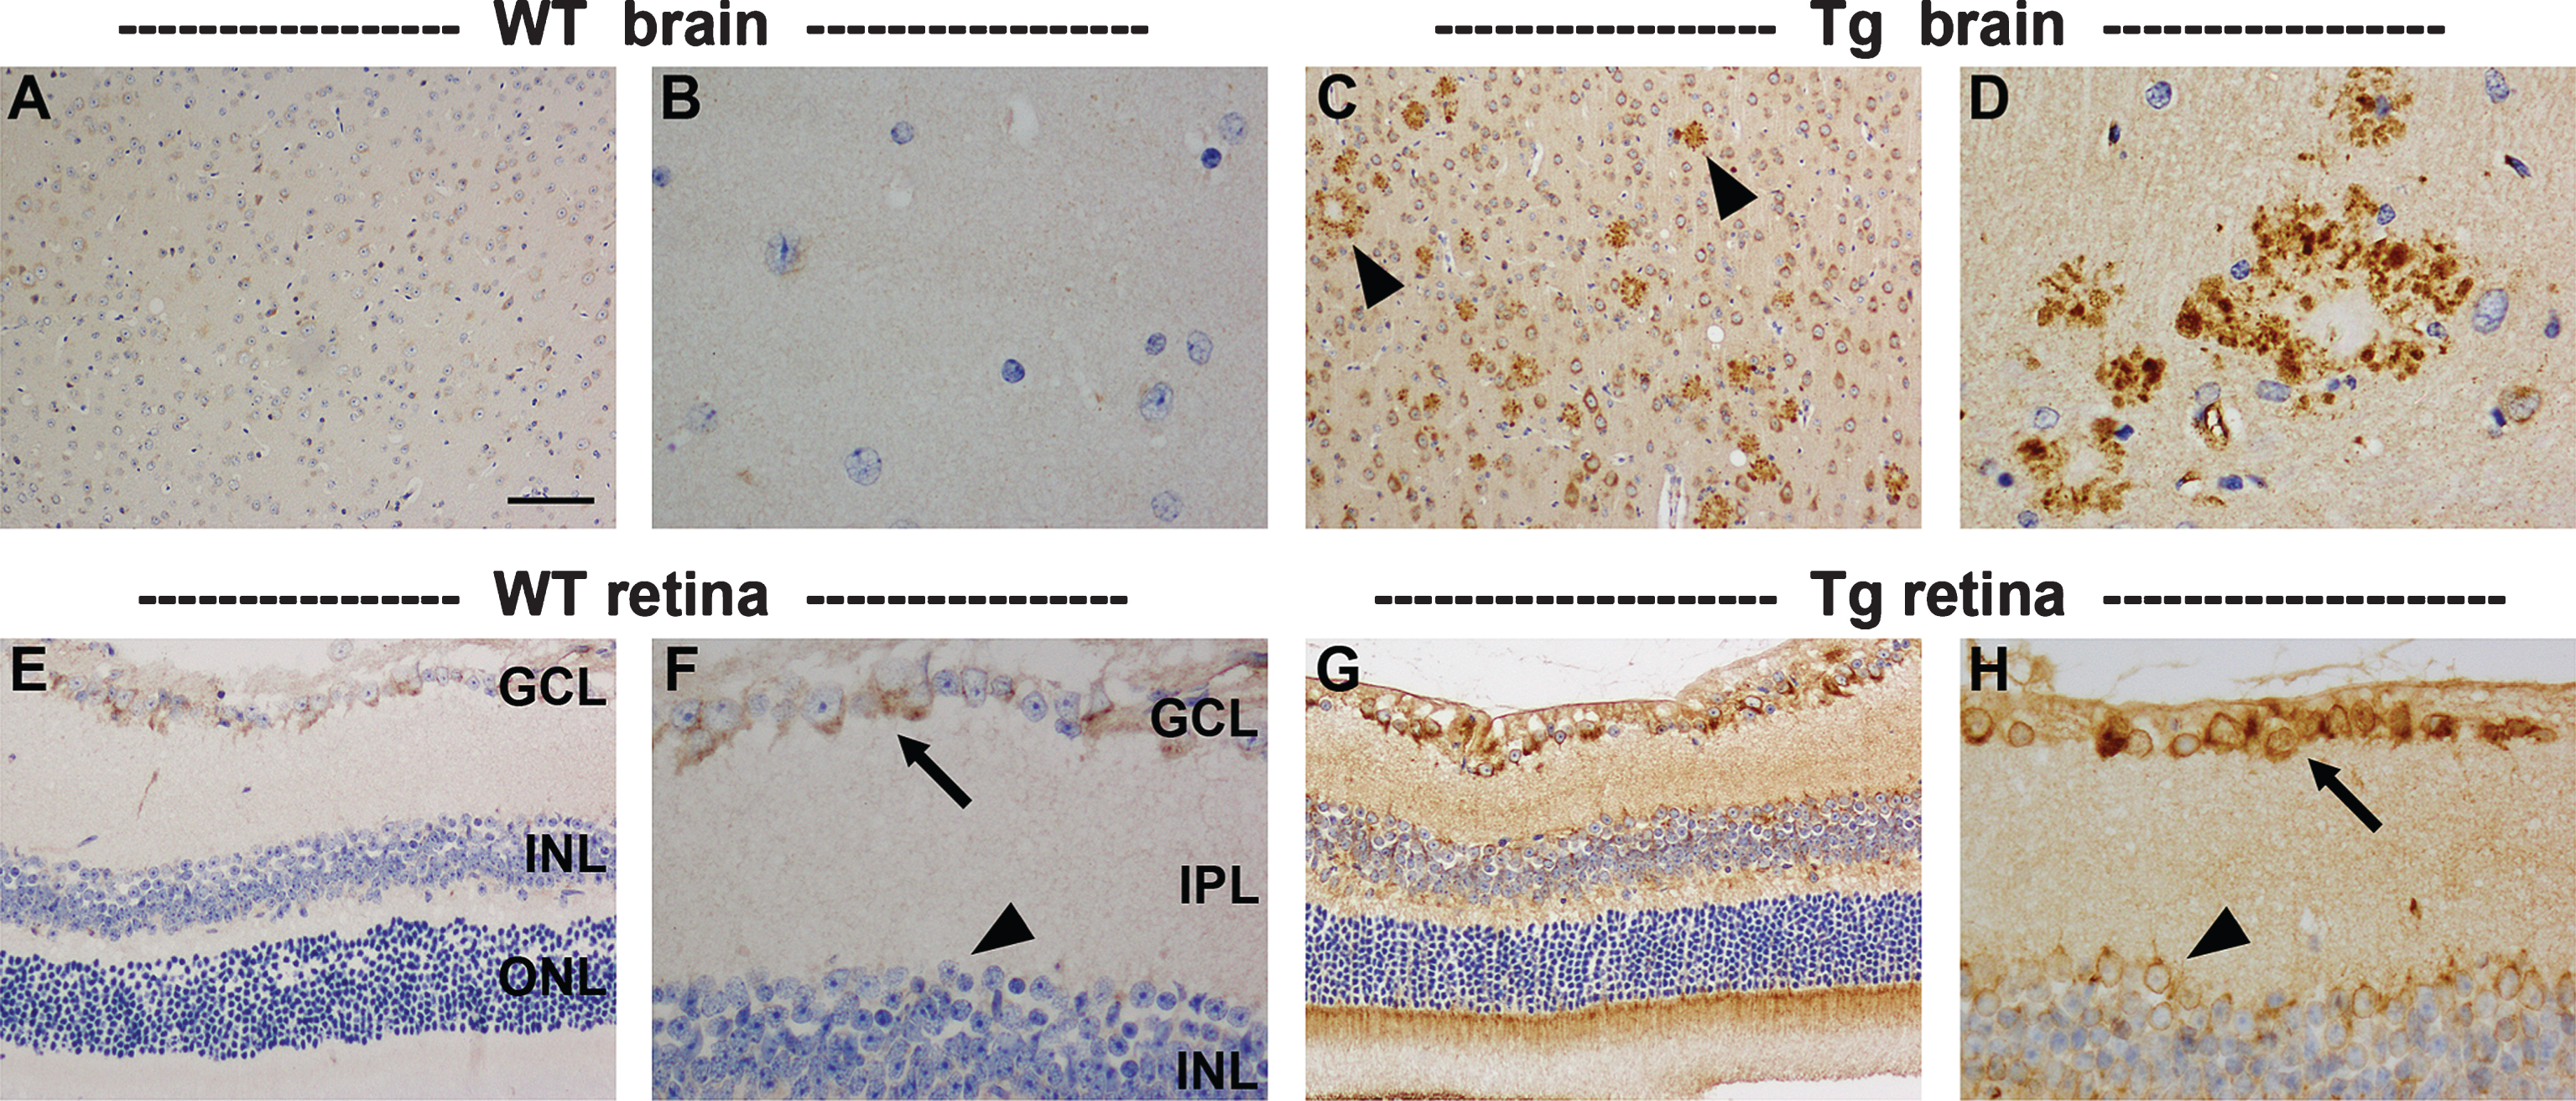 Representative images of AβPP immunolabeling in the brain and retina of 11-month-old WT and Tg mice. In WT parietal cortex (A) and hippocampus (B), AβPP localizes to the cytoplasm of neurons. In Tg mice, neuronal expression of AβPP is higher, and numerous dystrophic neurites surrounding amyloid plaques are present within the parietal cortex (C, arrowheads) and hippocampus (D). In the WT retina, AβPP localizes to the cytoplasm of RGCs (arrow), but is barely detectable within amacrine cells (arrowhead) or other neuronal cell types. In Tg mice, AβPP expression is markedly higher in RGCs (arrow), and is also clearly detectable in other neuronal populations (arrowhead); however, no AβPP-positive dystrophic neurites are evident. Scale bar: A, C = 100 μm; E, G = 50 μm, B,D,F,H = 25 μm.